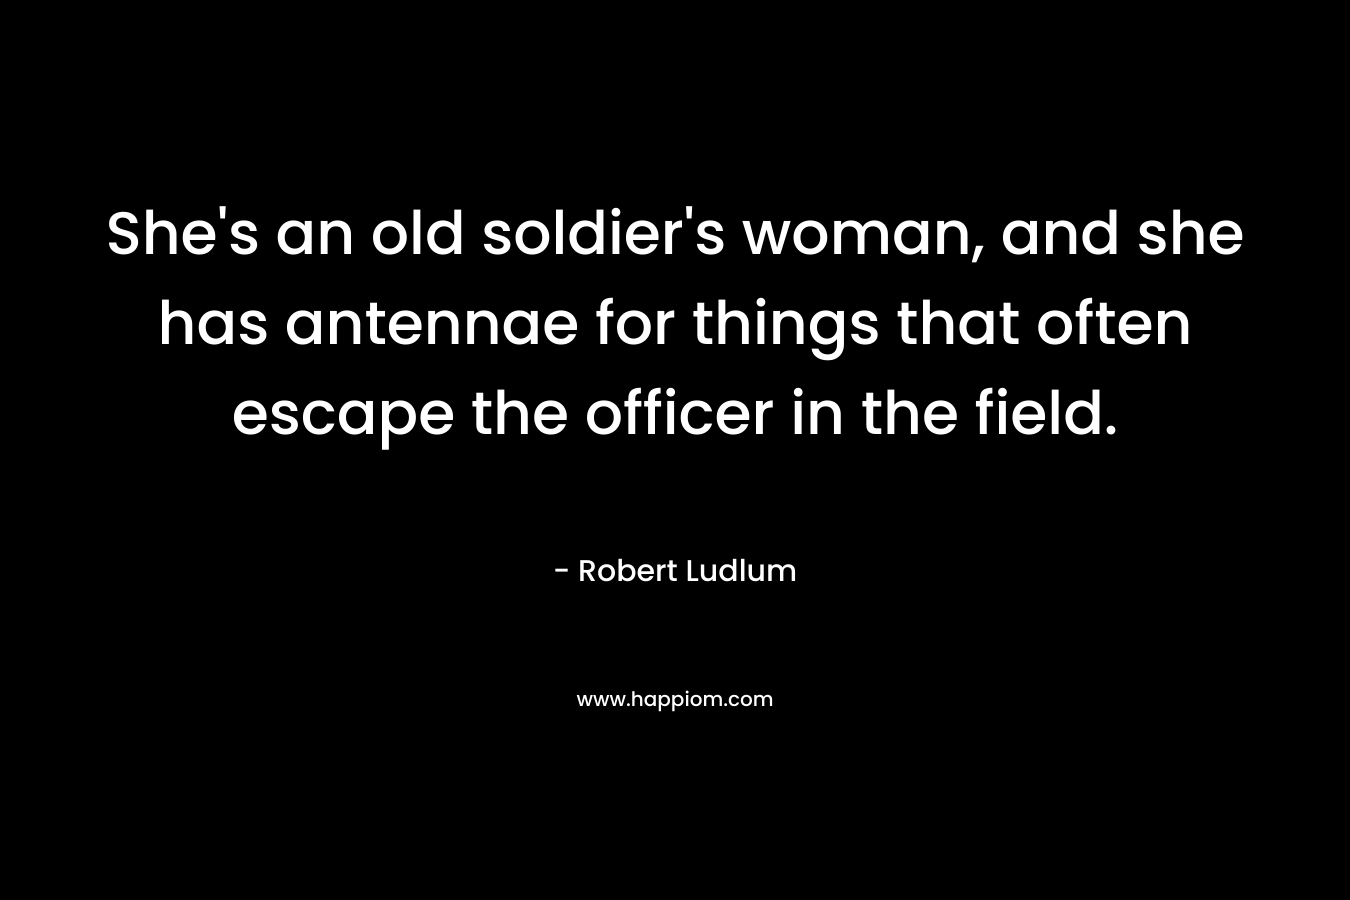 She’s an old soldier’s woman, and she has antennae for things that often escape the officer in the field. – Robert Ludlum